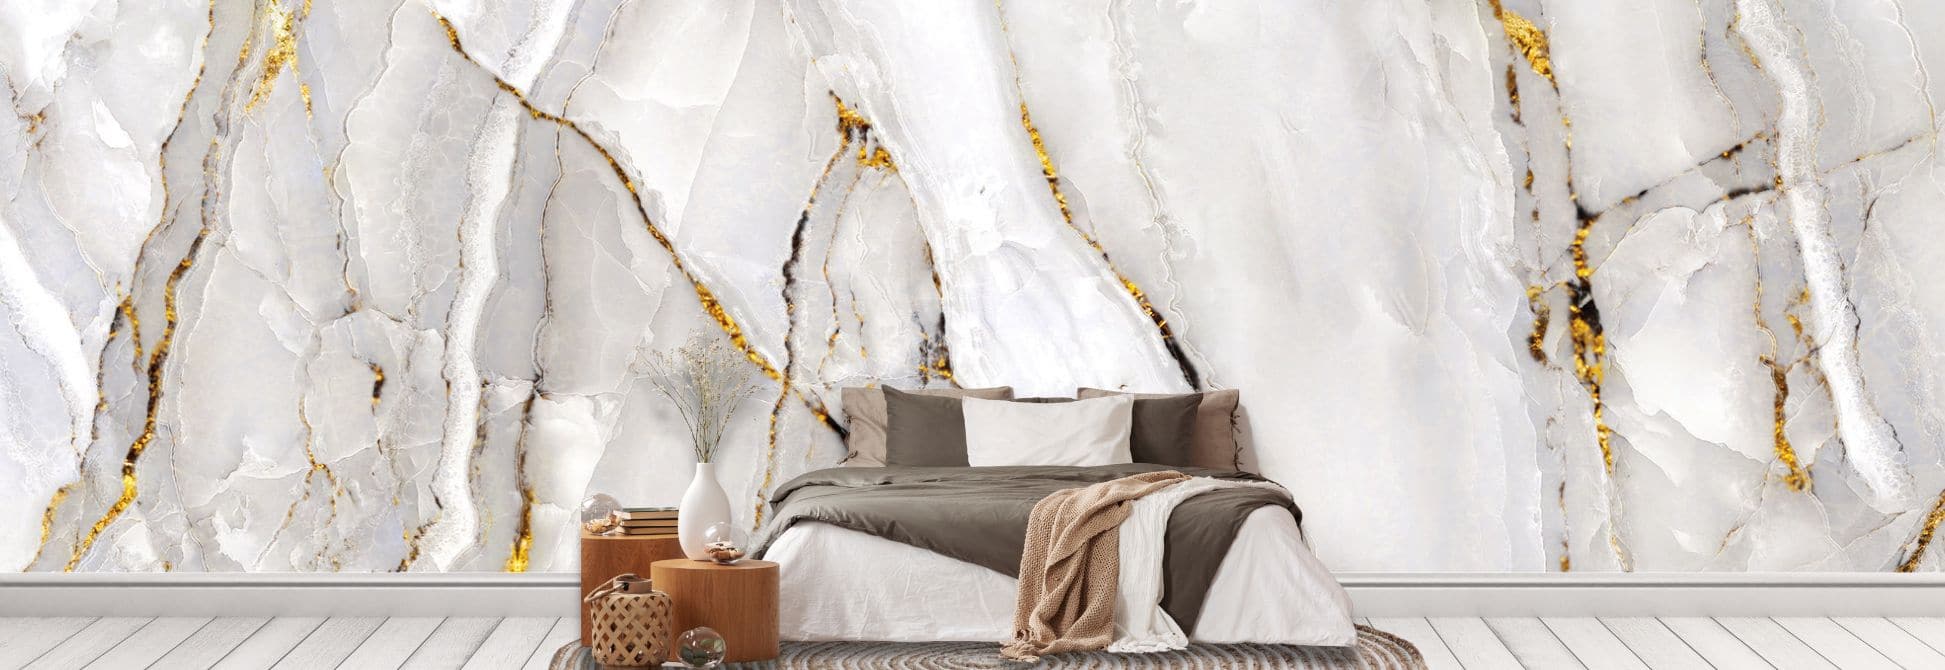 Shop marble wallpaper and marble wall murals, like this white and gold design on a bedroom wall, from About Murals.